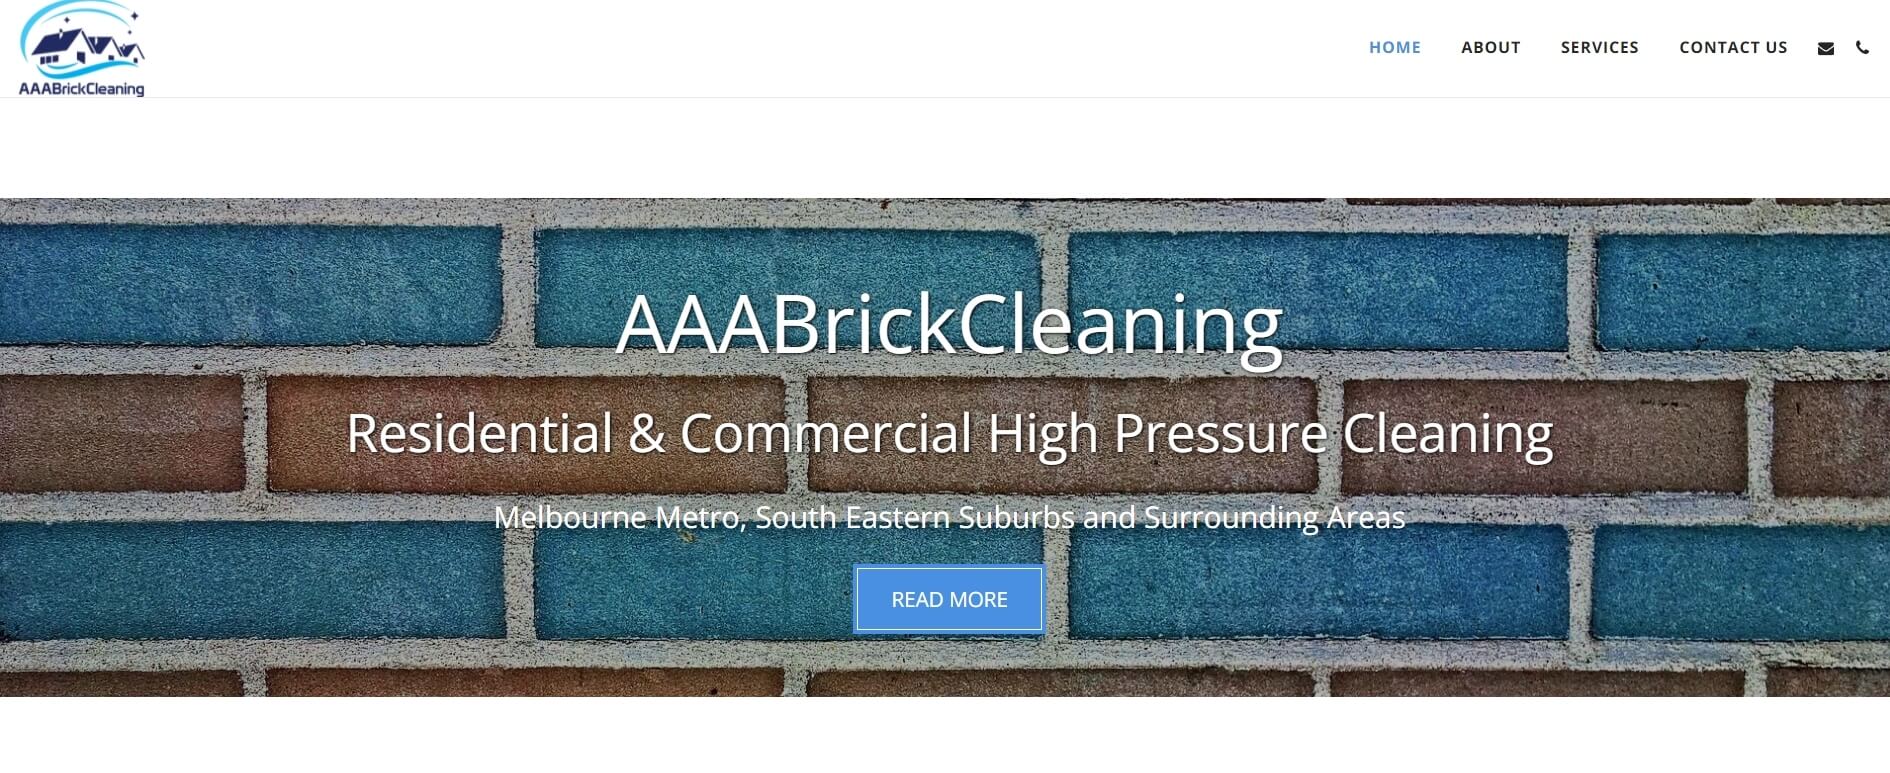 AAA Brick Cleaning